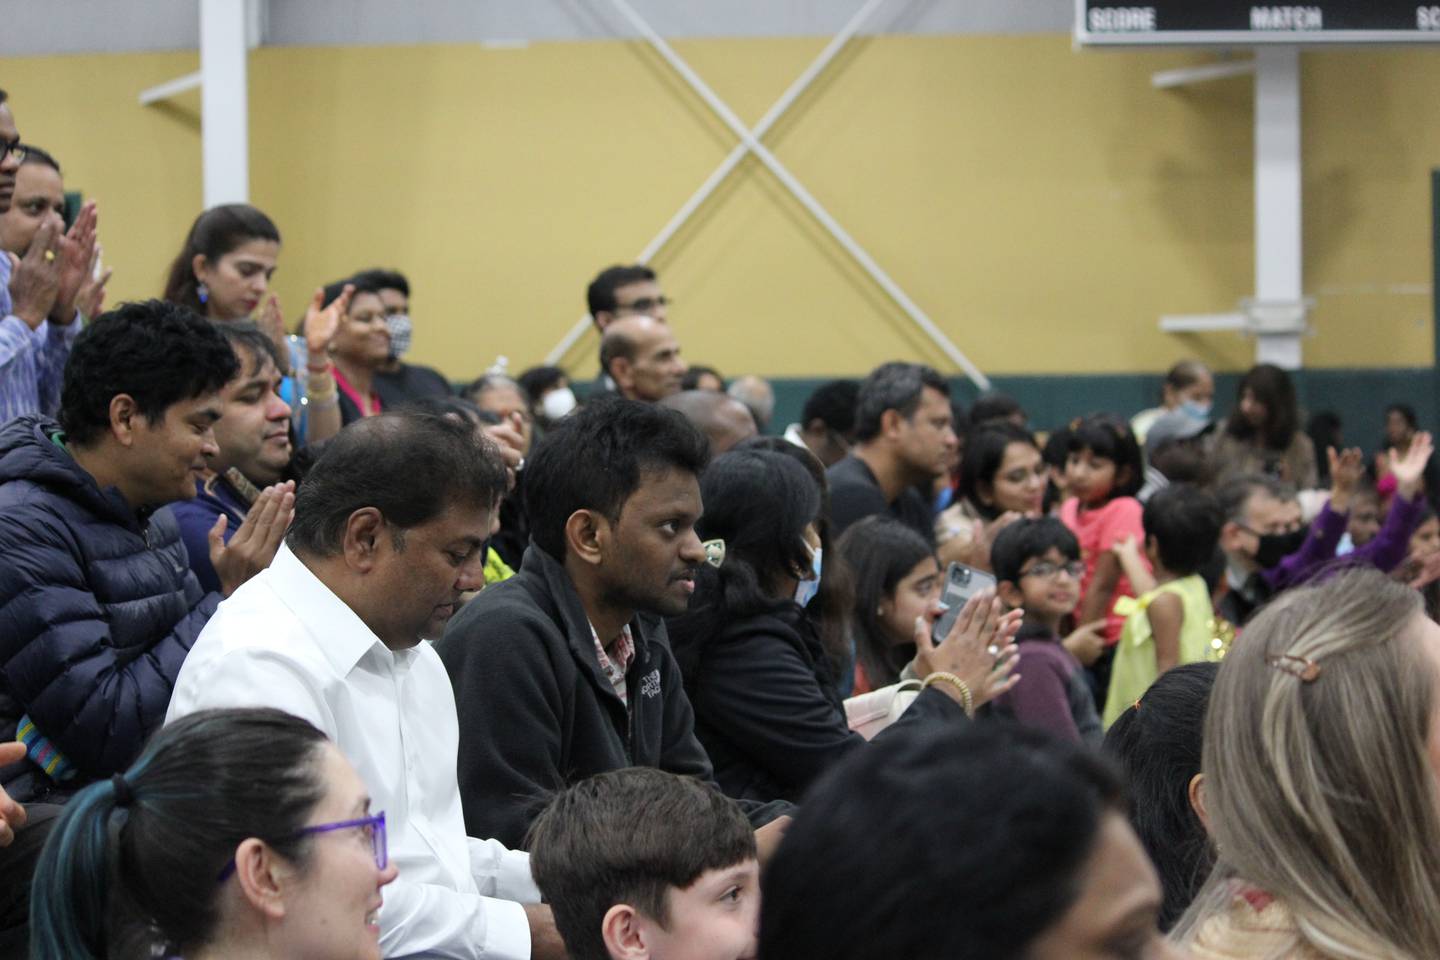 A crowd of Indian American residents sit in a large venue. Some are clapping.